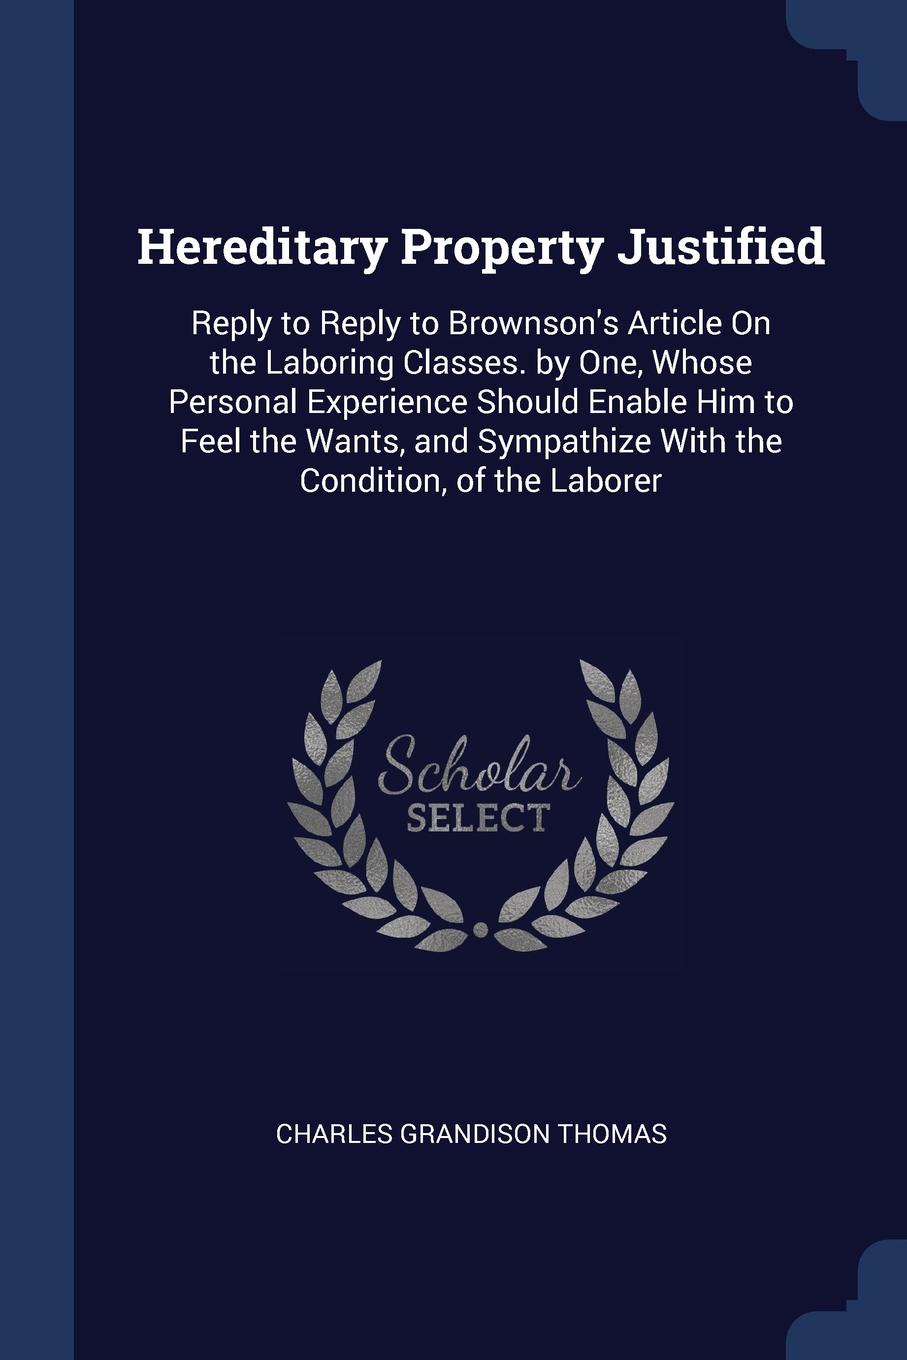 Hereditary Property Justified. Reply to Reply to Brownson.s Article On the Laboring Classes. by One, Whose Personal Experience Should Enable Him to Feel the Wants, and Sympathize With the Condition, of the Laborer